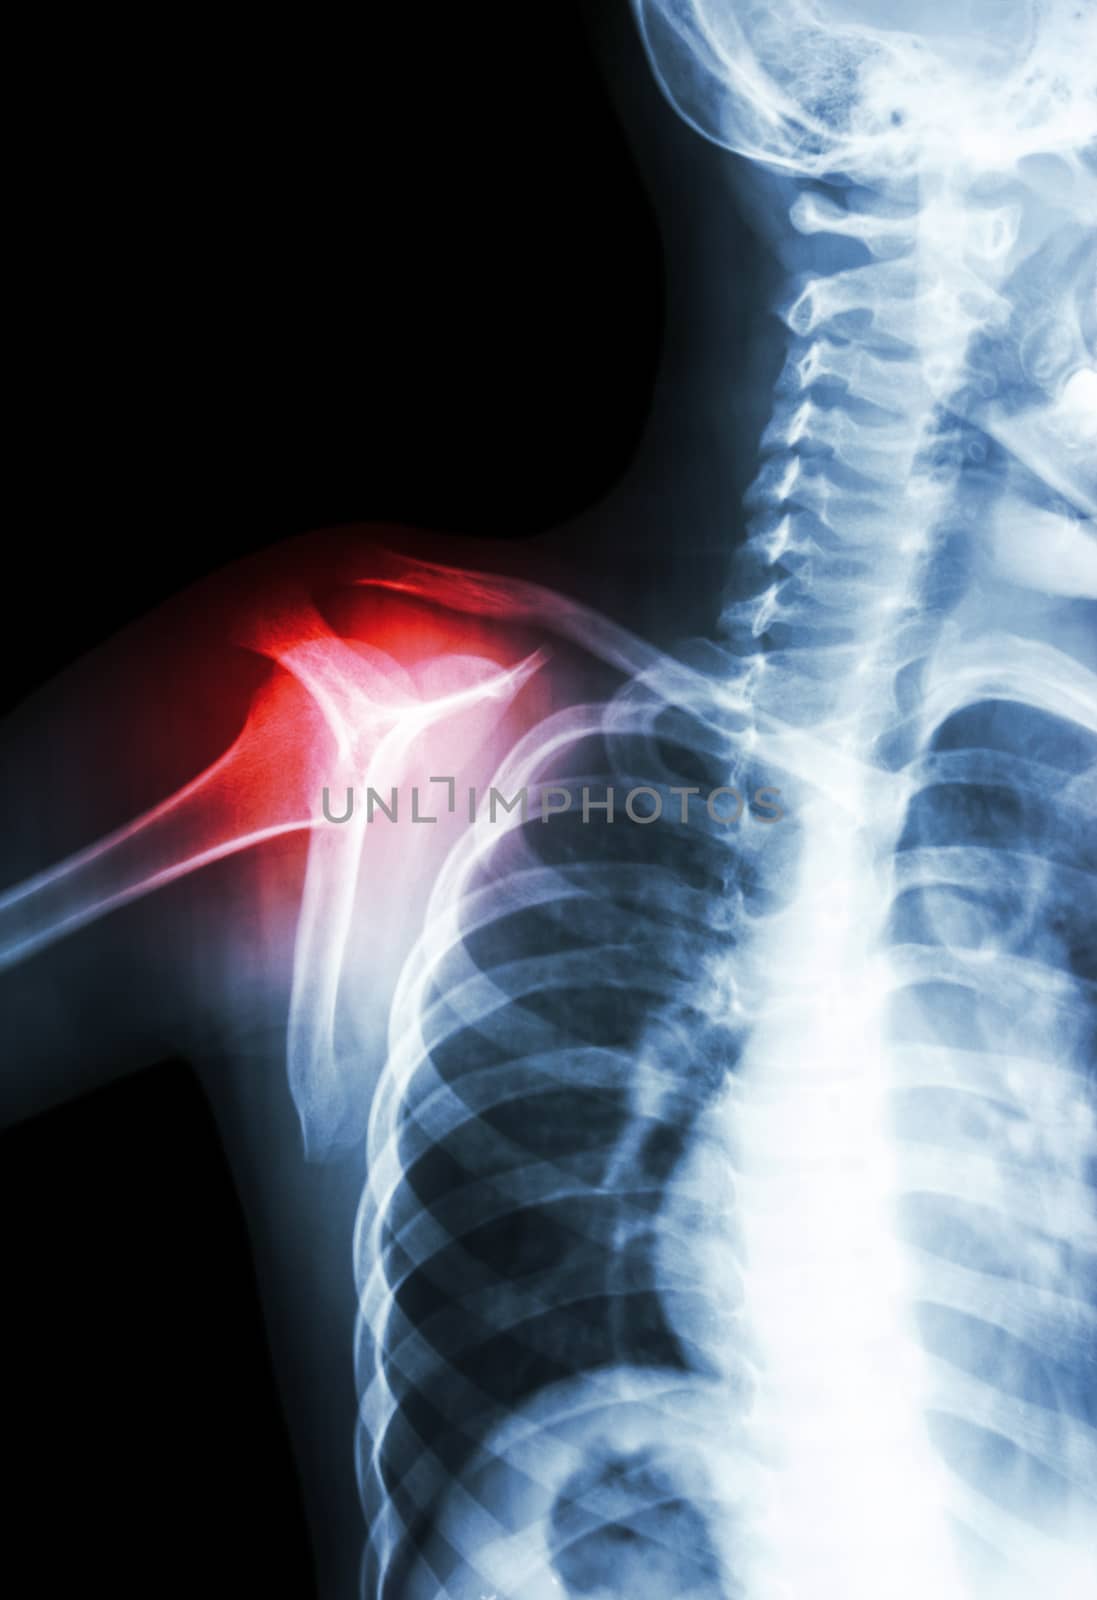 film x-ray transcapula Y view : show child's shoulder and arthritis at shoulder